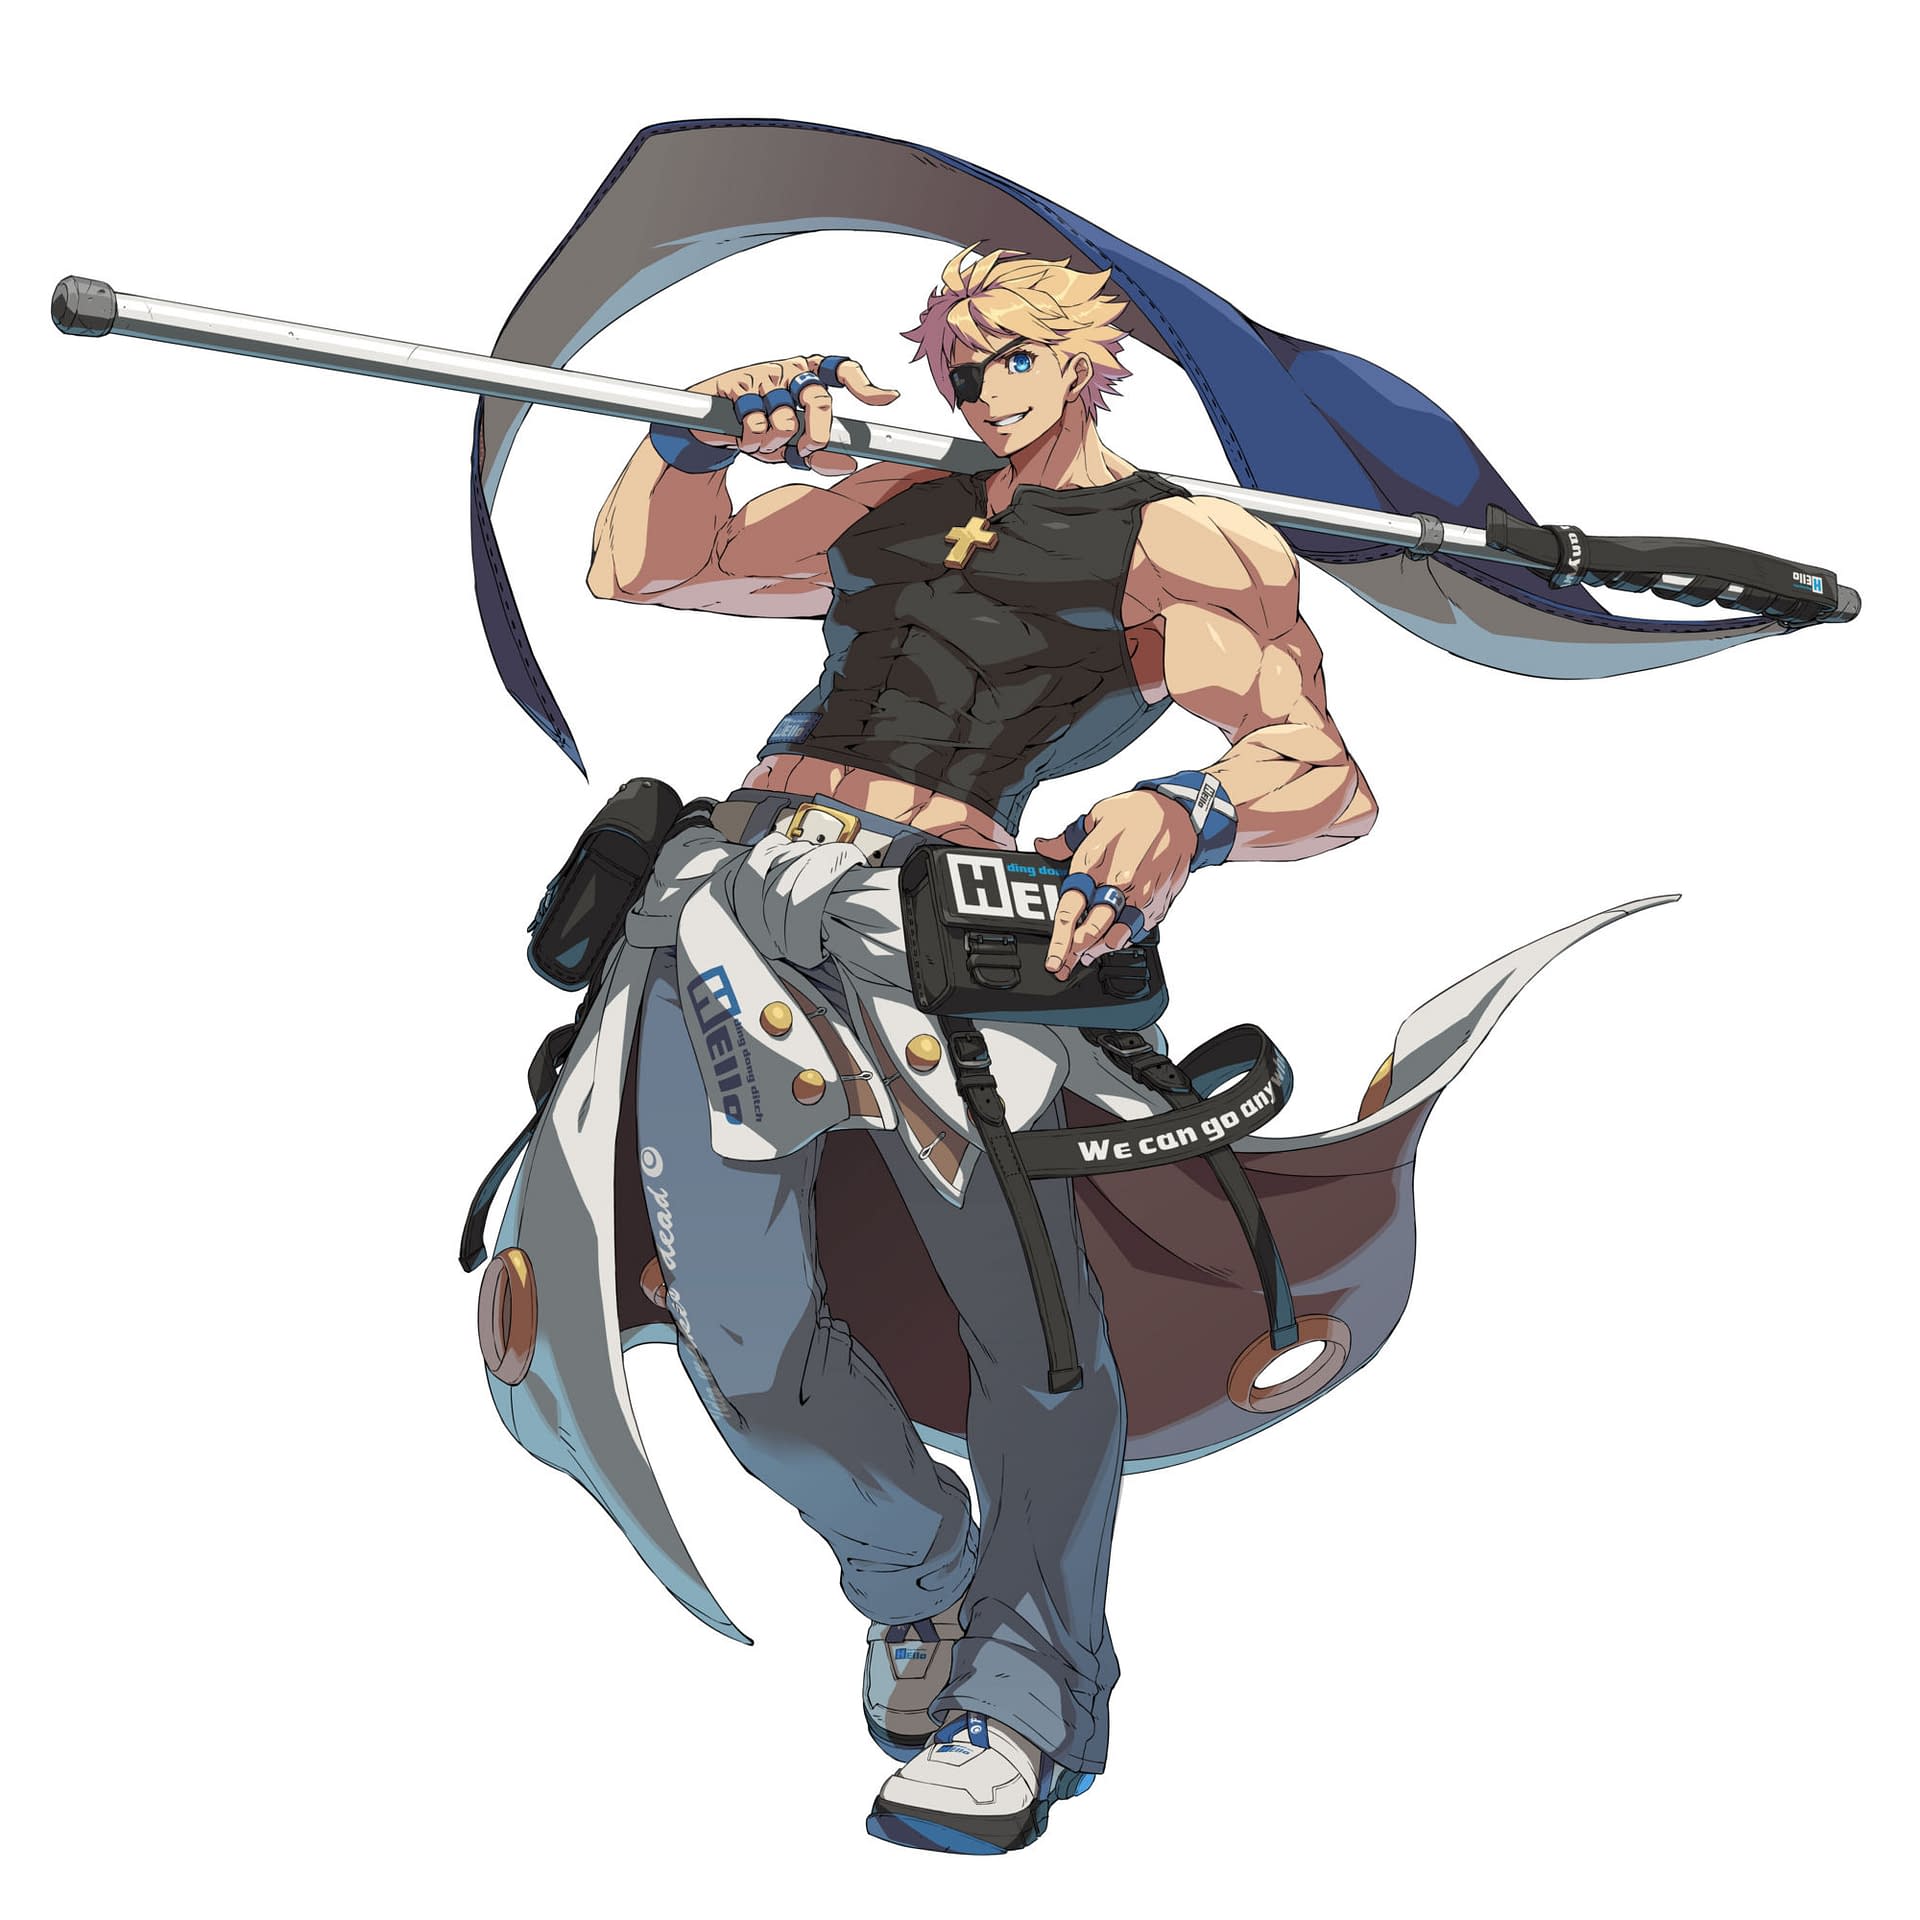 Bridget has returned to Guilty Gear Strive as first character of Season 2, Page 2